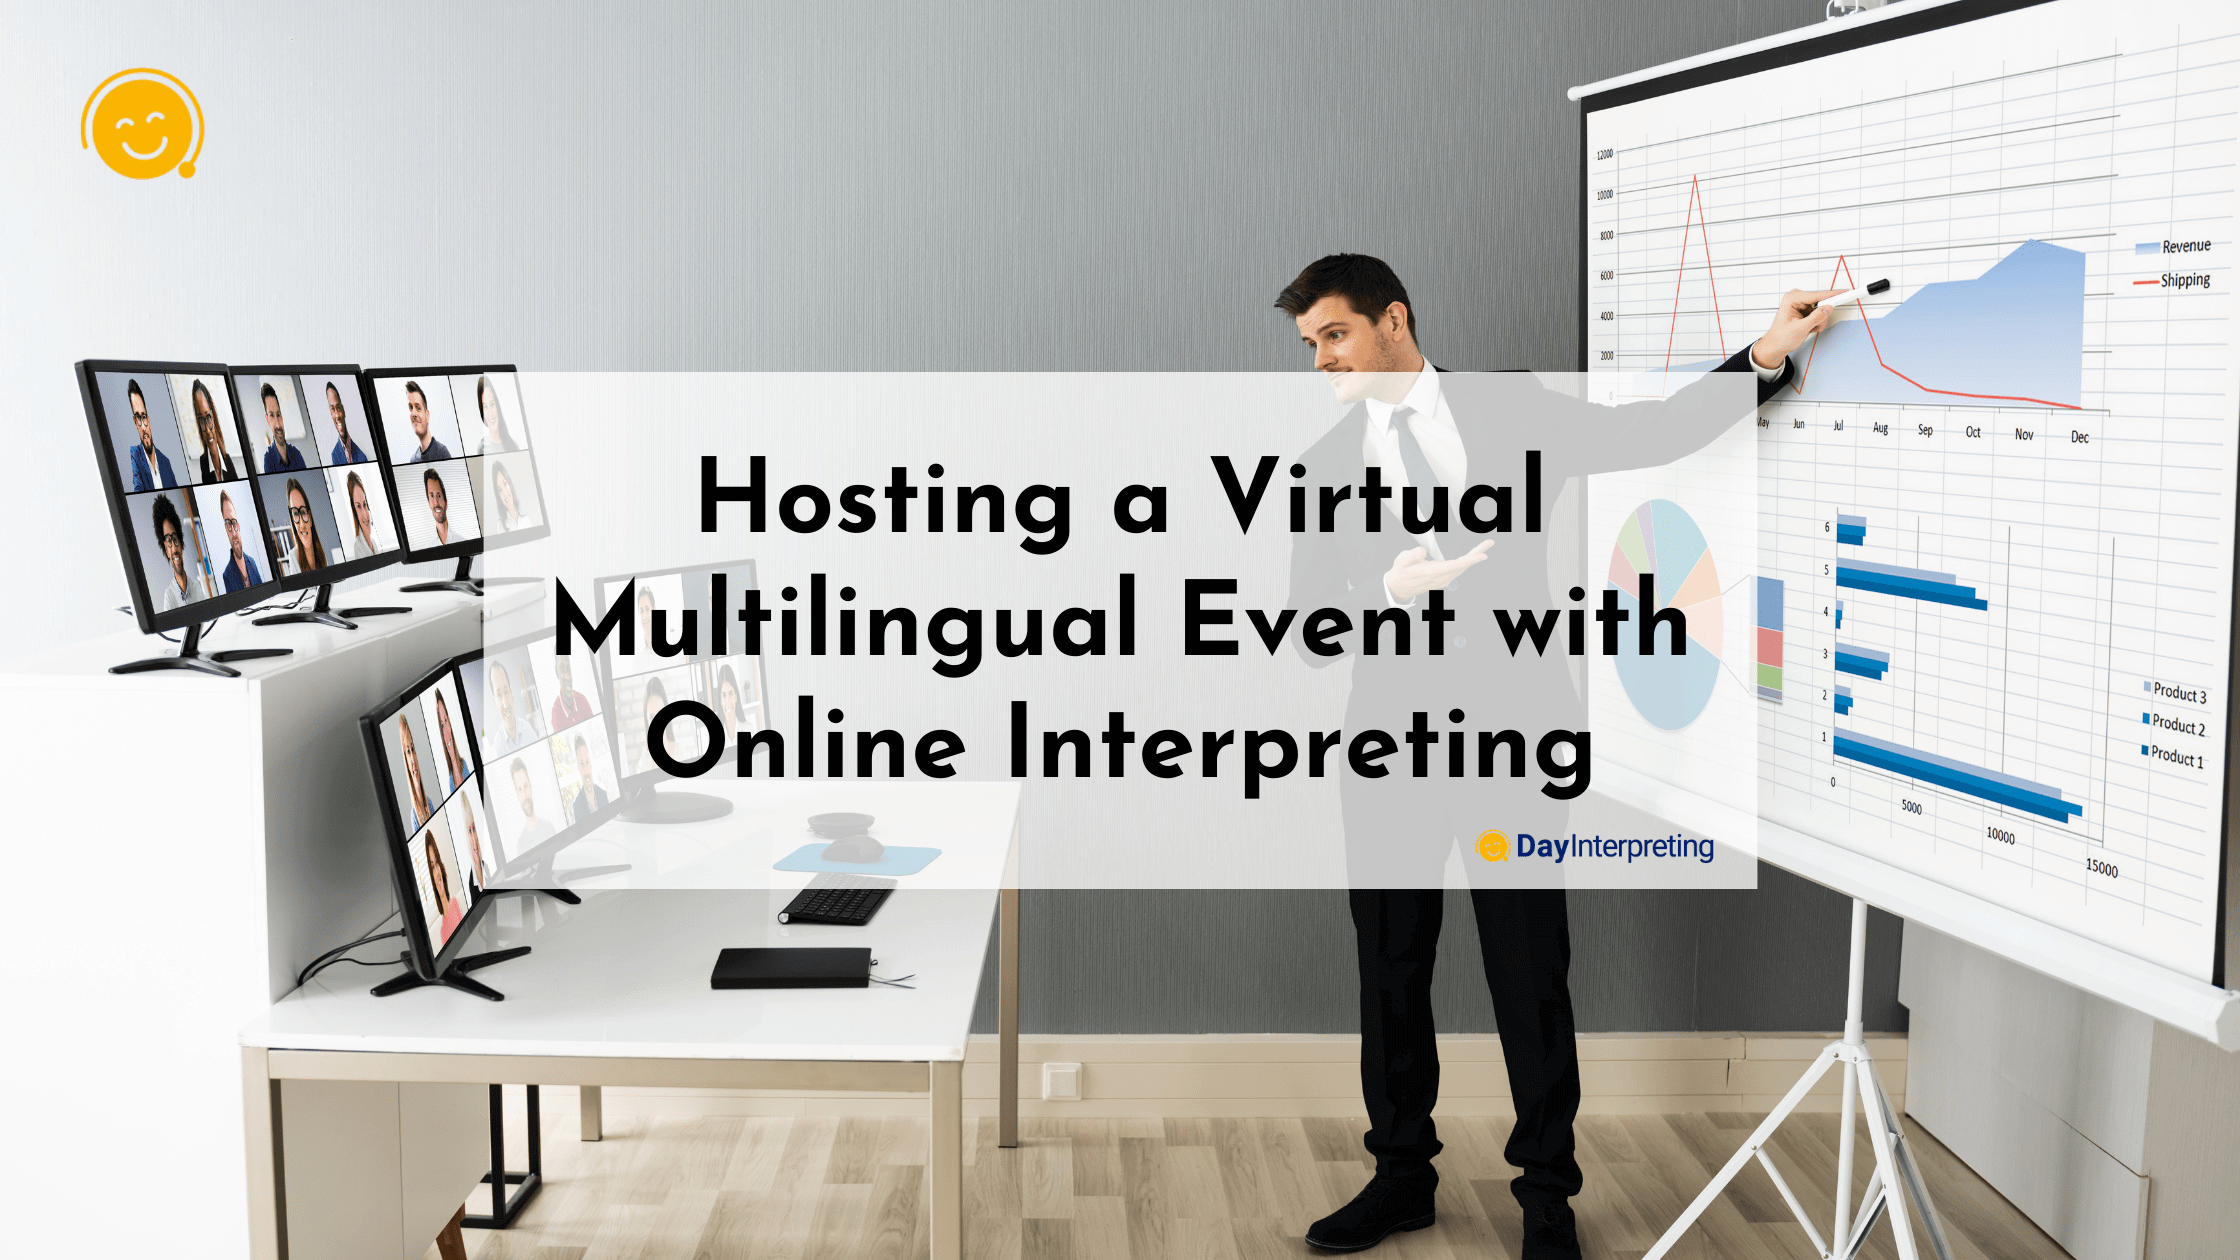 Hosting a Virtual Multilingual Event with Online Interpreting